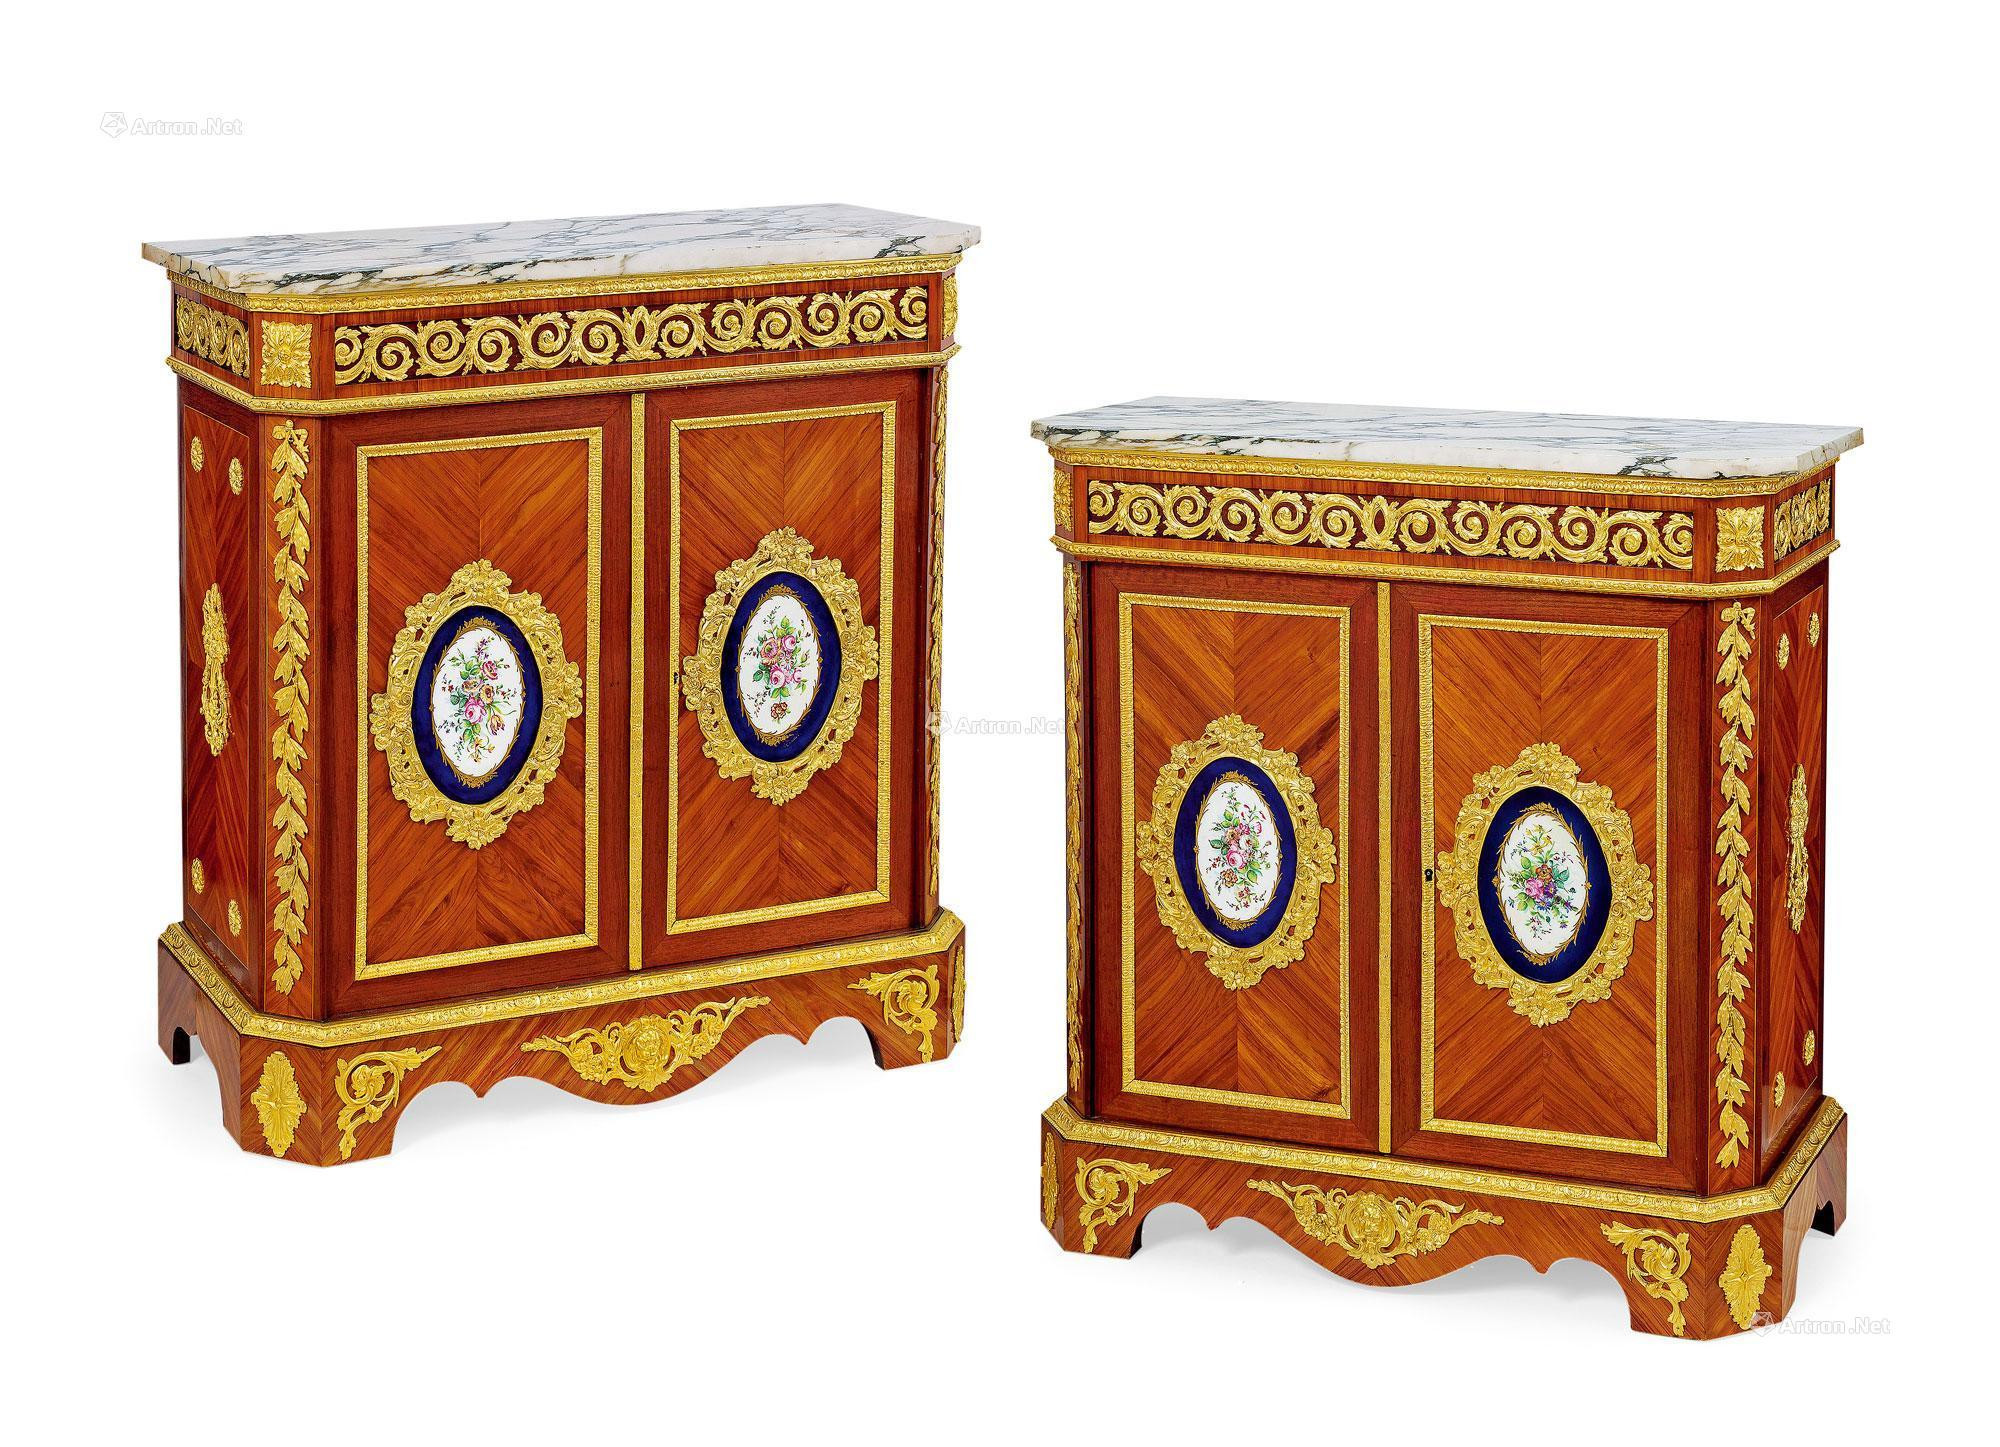 A PAIR OF FRENCH PORCELAIN PANEL INLAID SIDE CABINETS BY BEFORT JEUNE